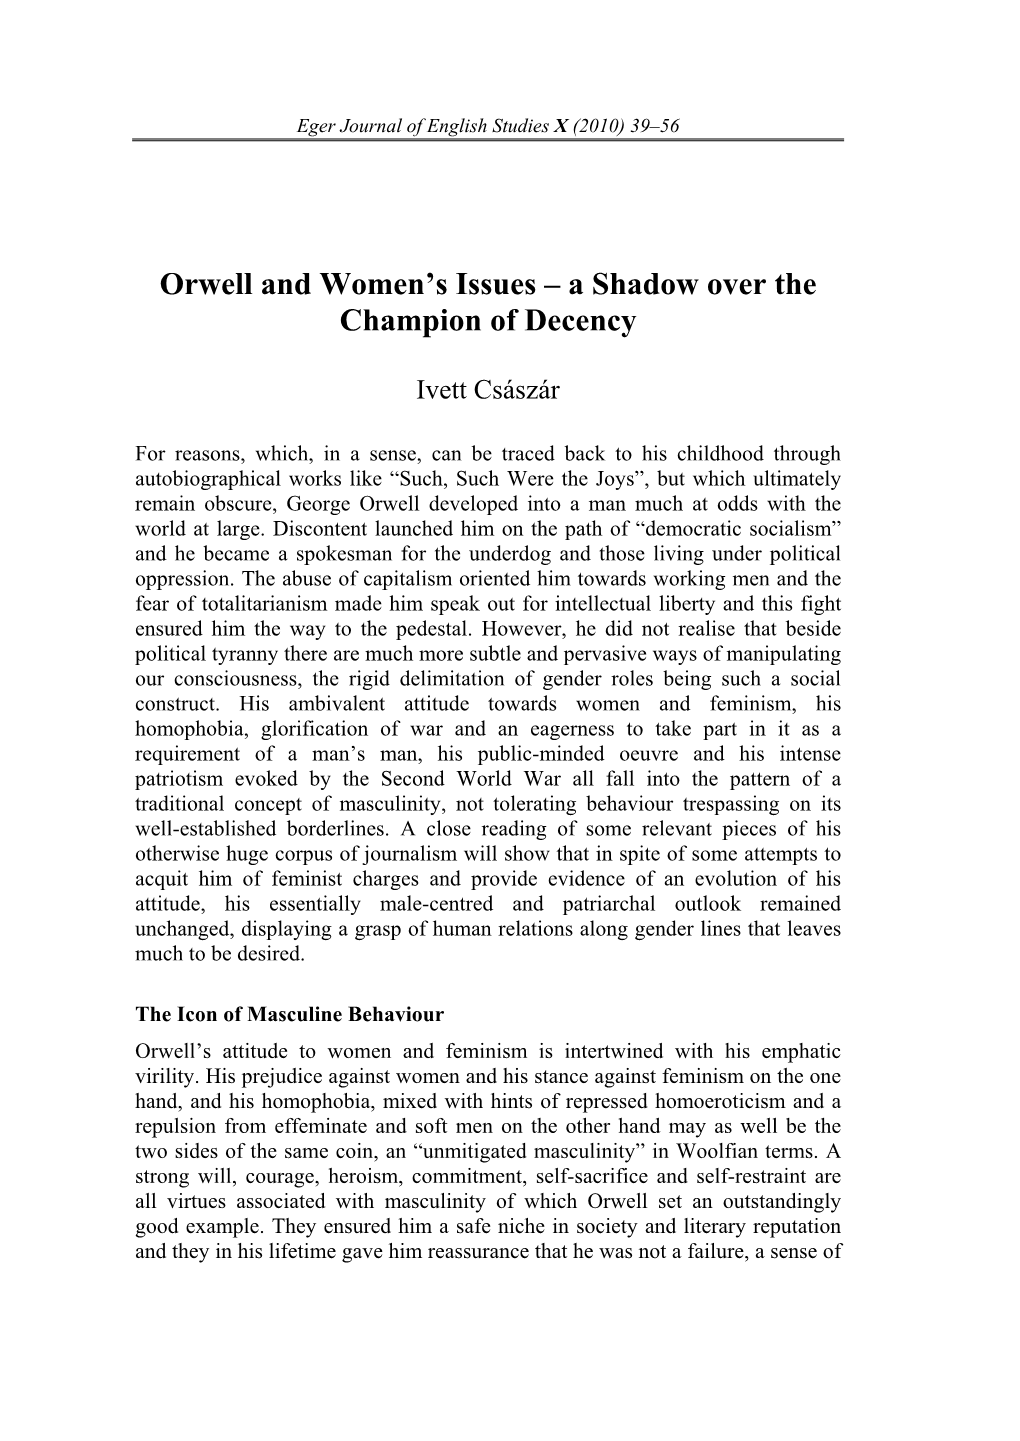 Orwell and Women's Issues – a Shadow Over the Champion Of